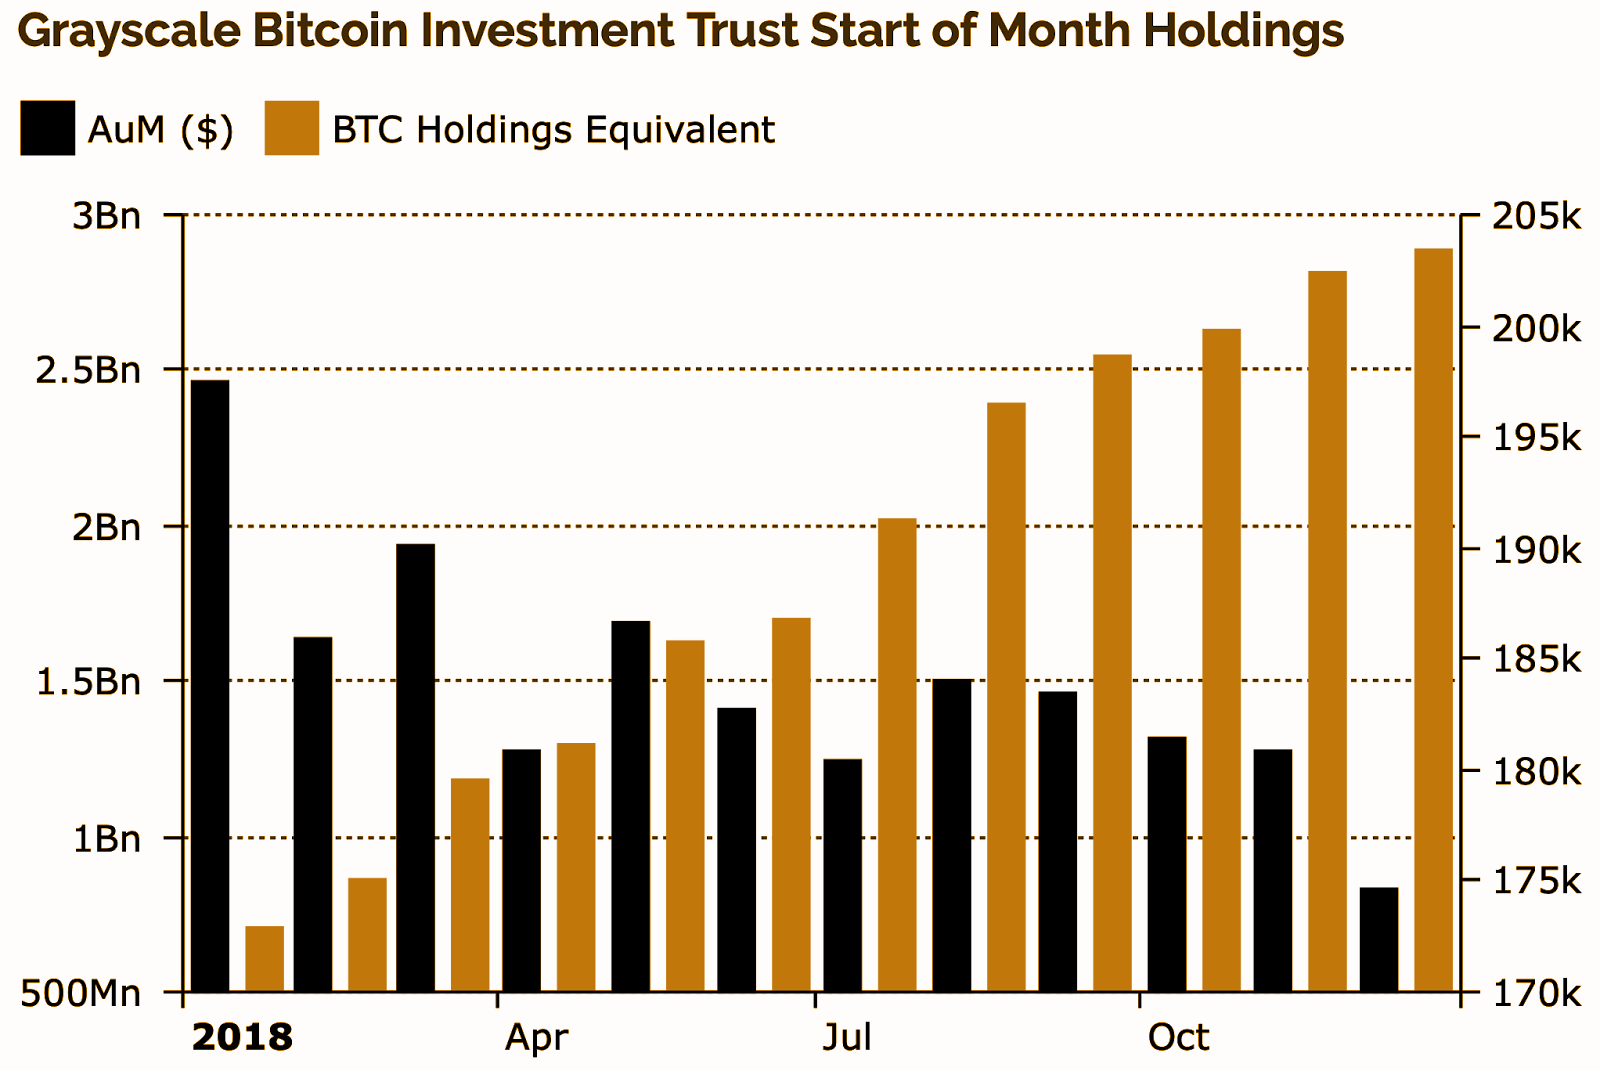 Grayscale Bitcoin Investment Trust Start of Mounth Holdings